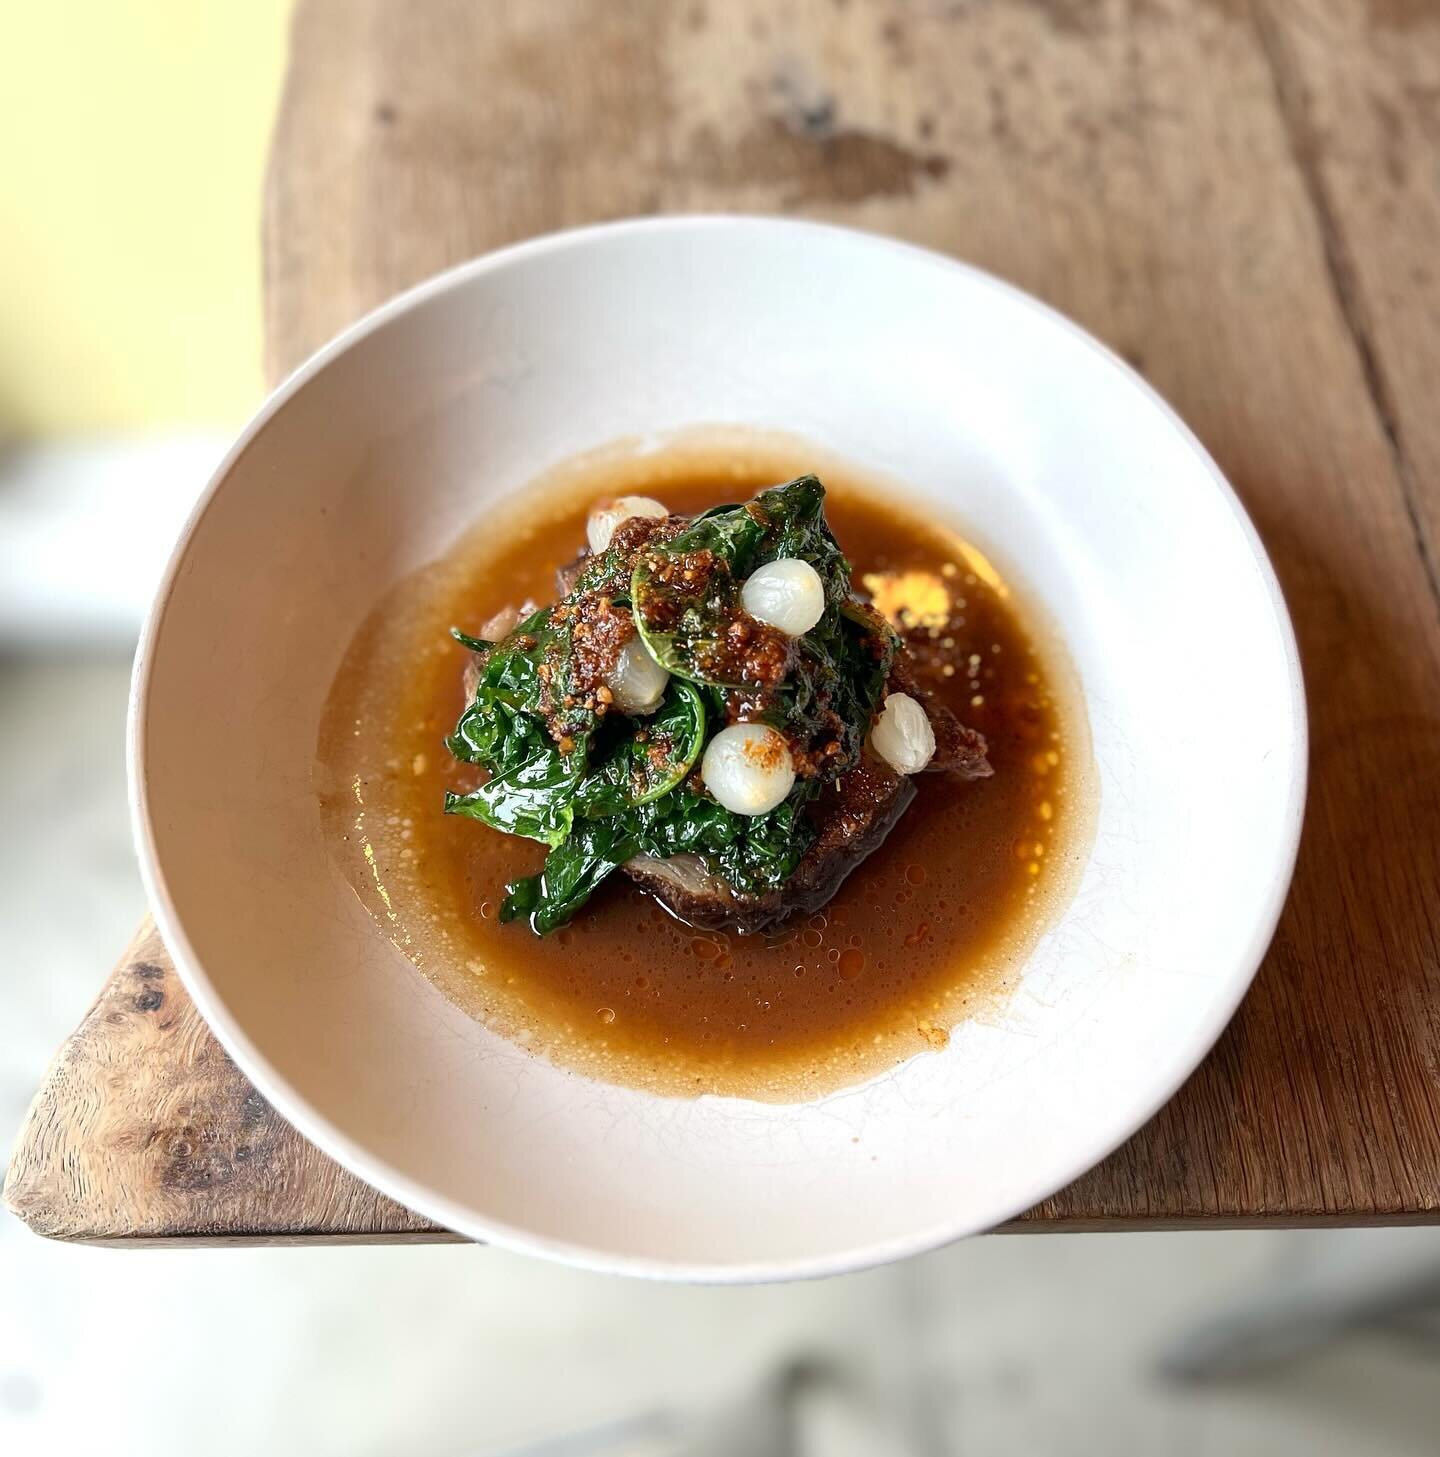 Today&rsquo;s mood in a plate 🍲
Braised beef, cime di rapa &amp; chili oil. 
Warm, hearty and delicious. 

Don&rsquo;t forget to be even kinder this month &hearts;️